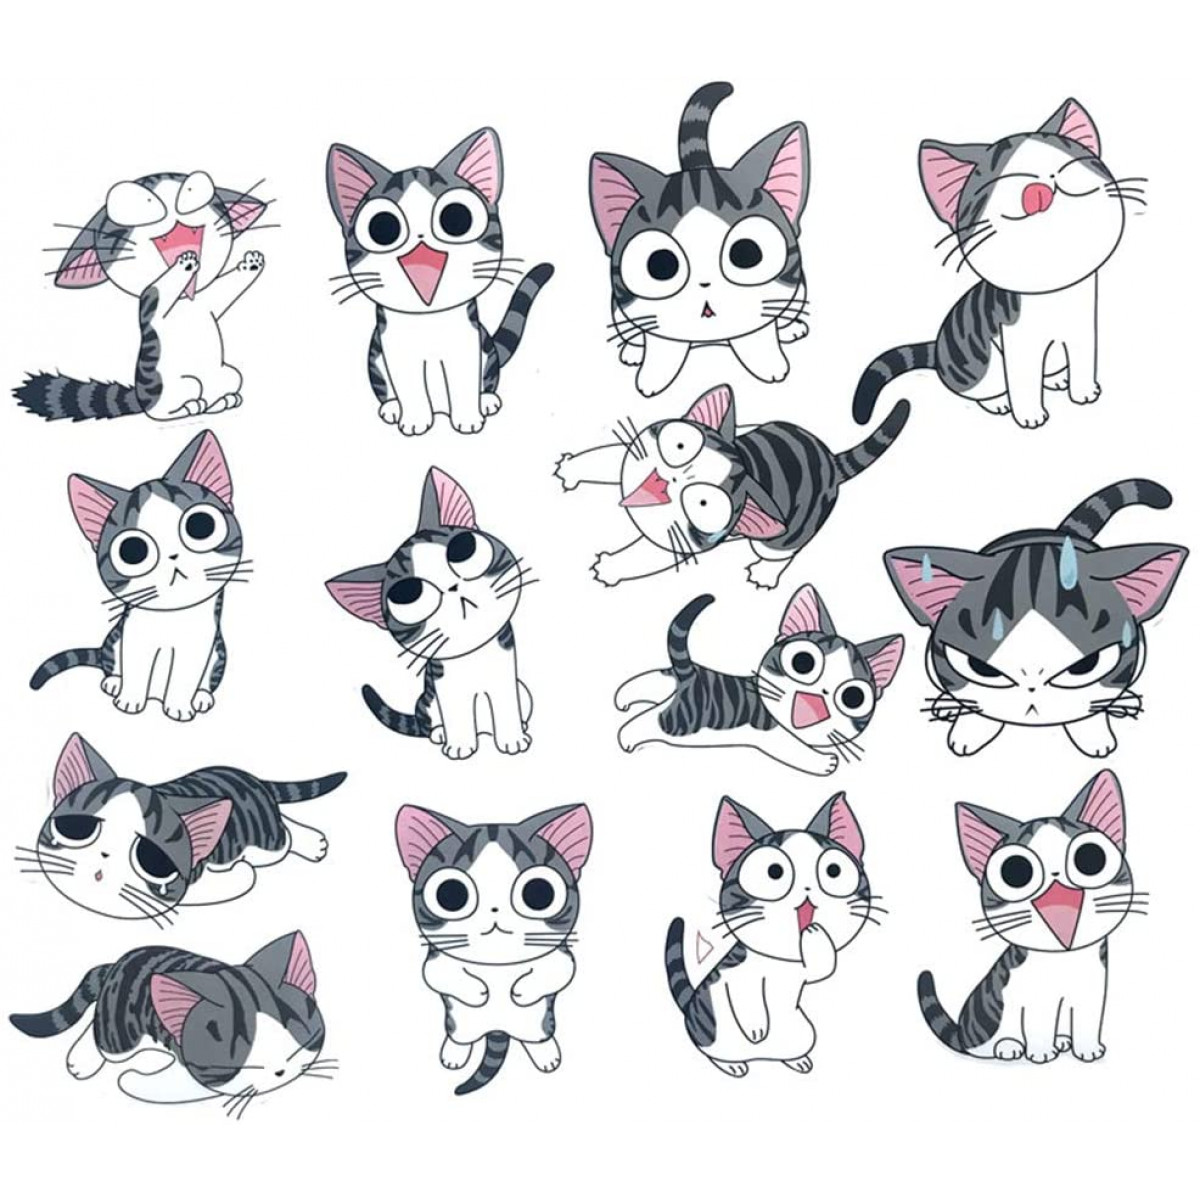 Cute cat Stickers for Laptop Stickers Car Cartoon Water